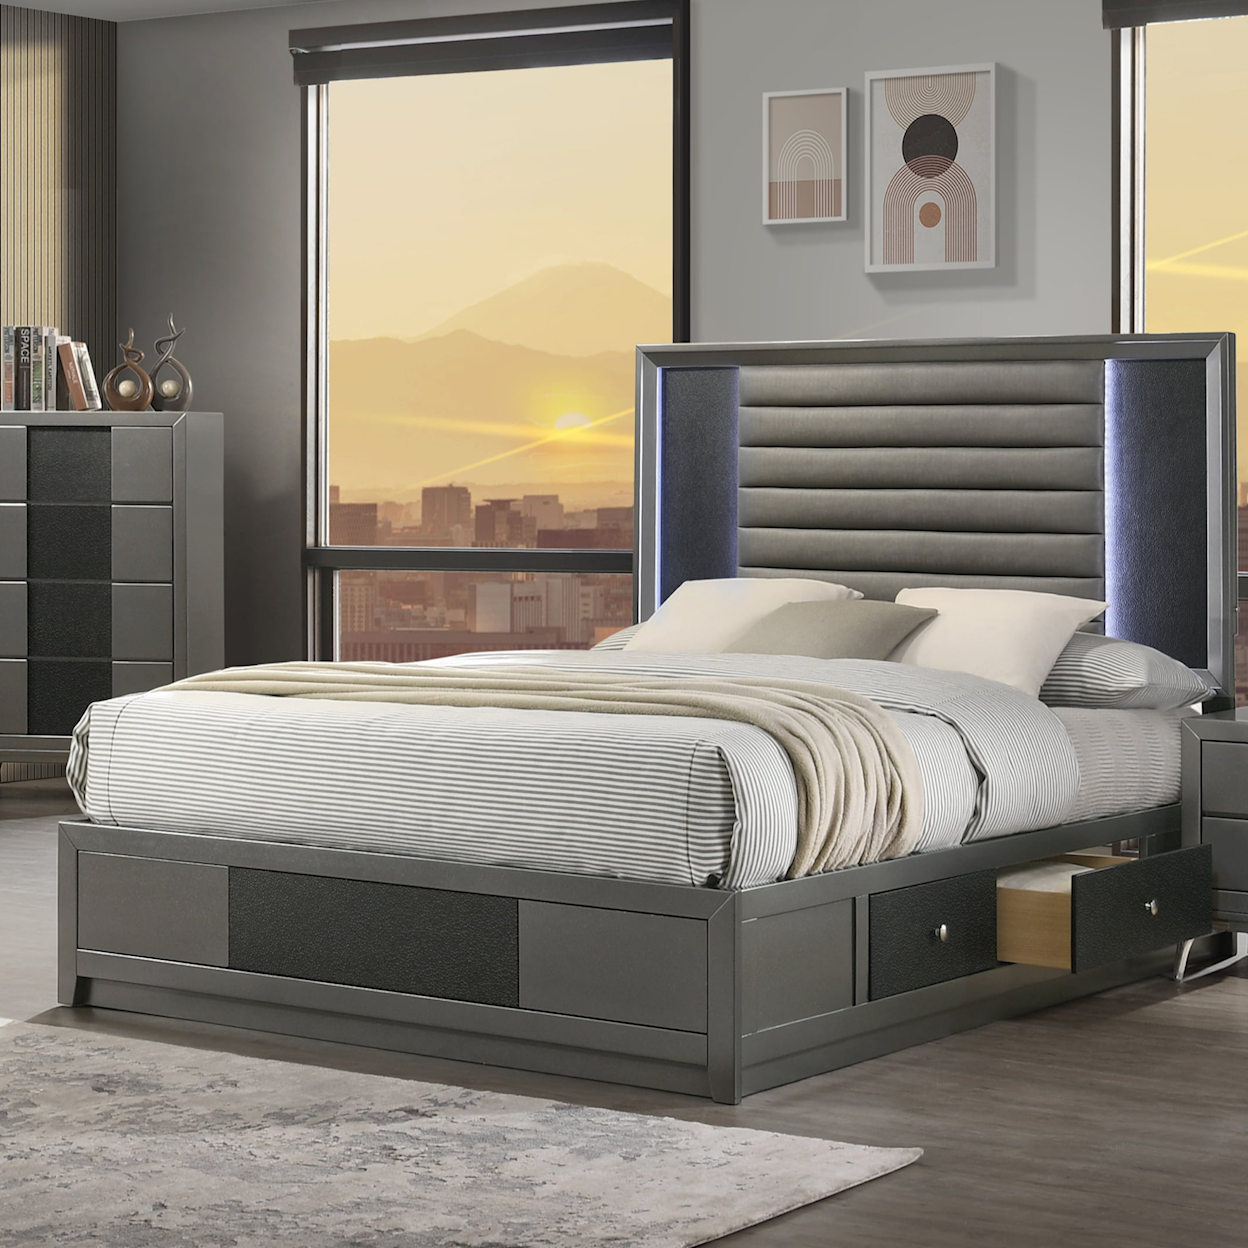 New Classic Nocturne California King Bed